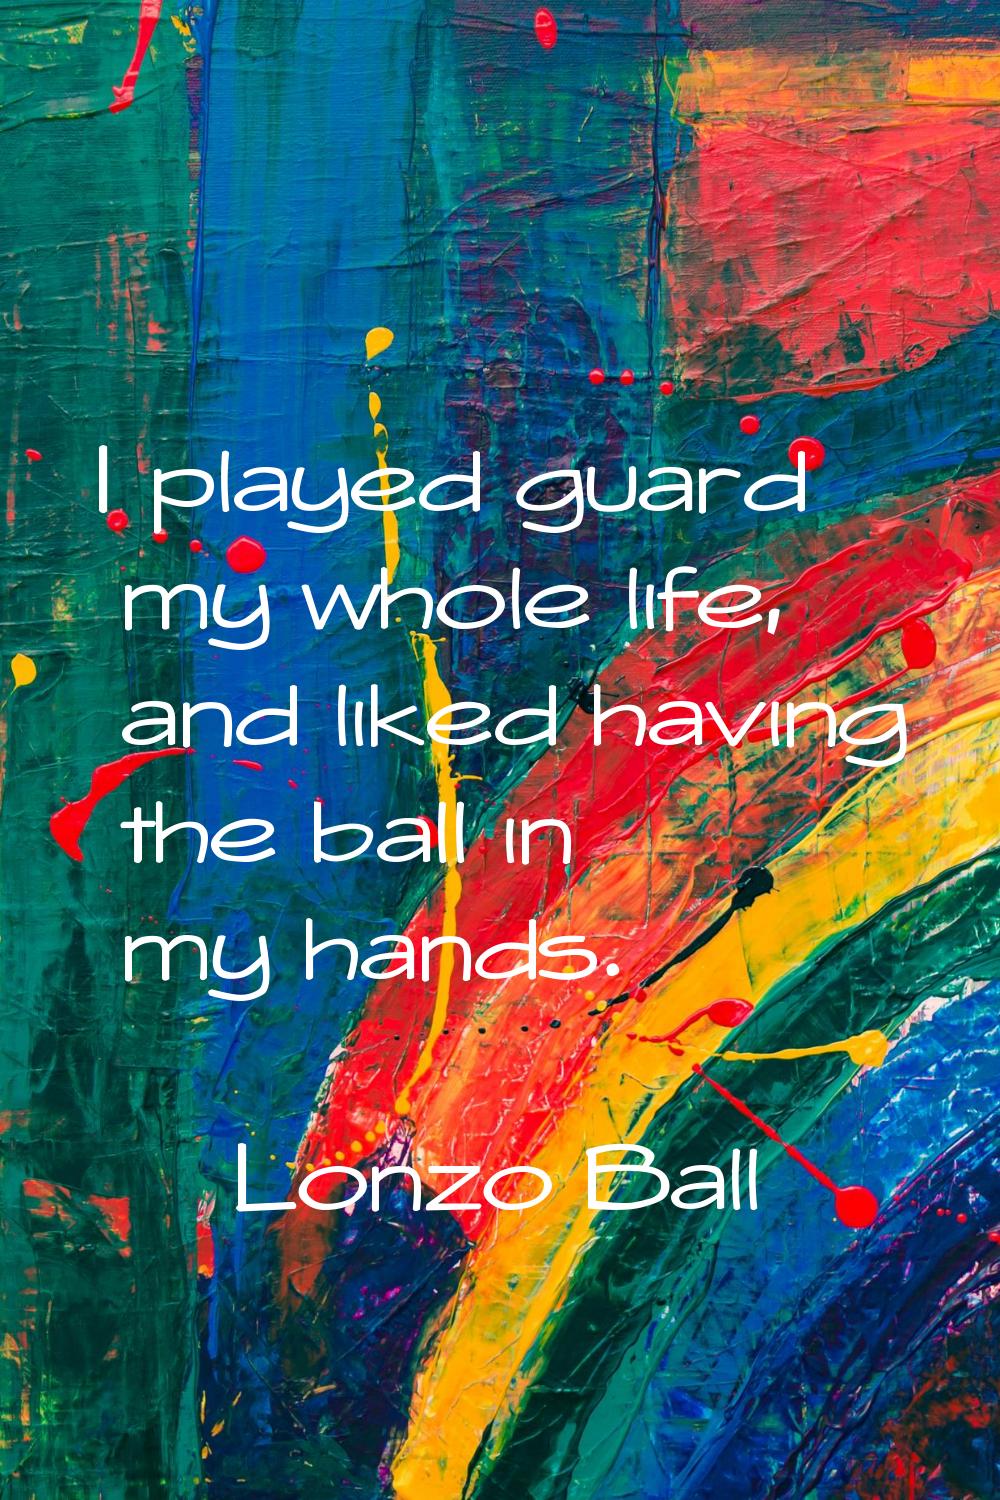 I played guard my whole life, and liked having the ball in my hands.